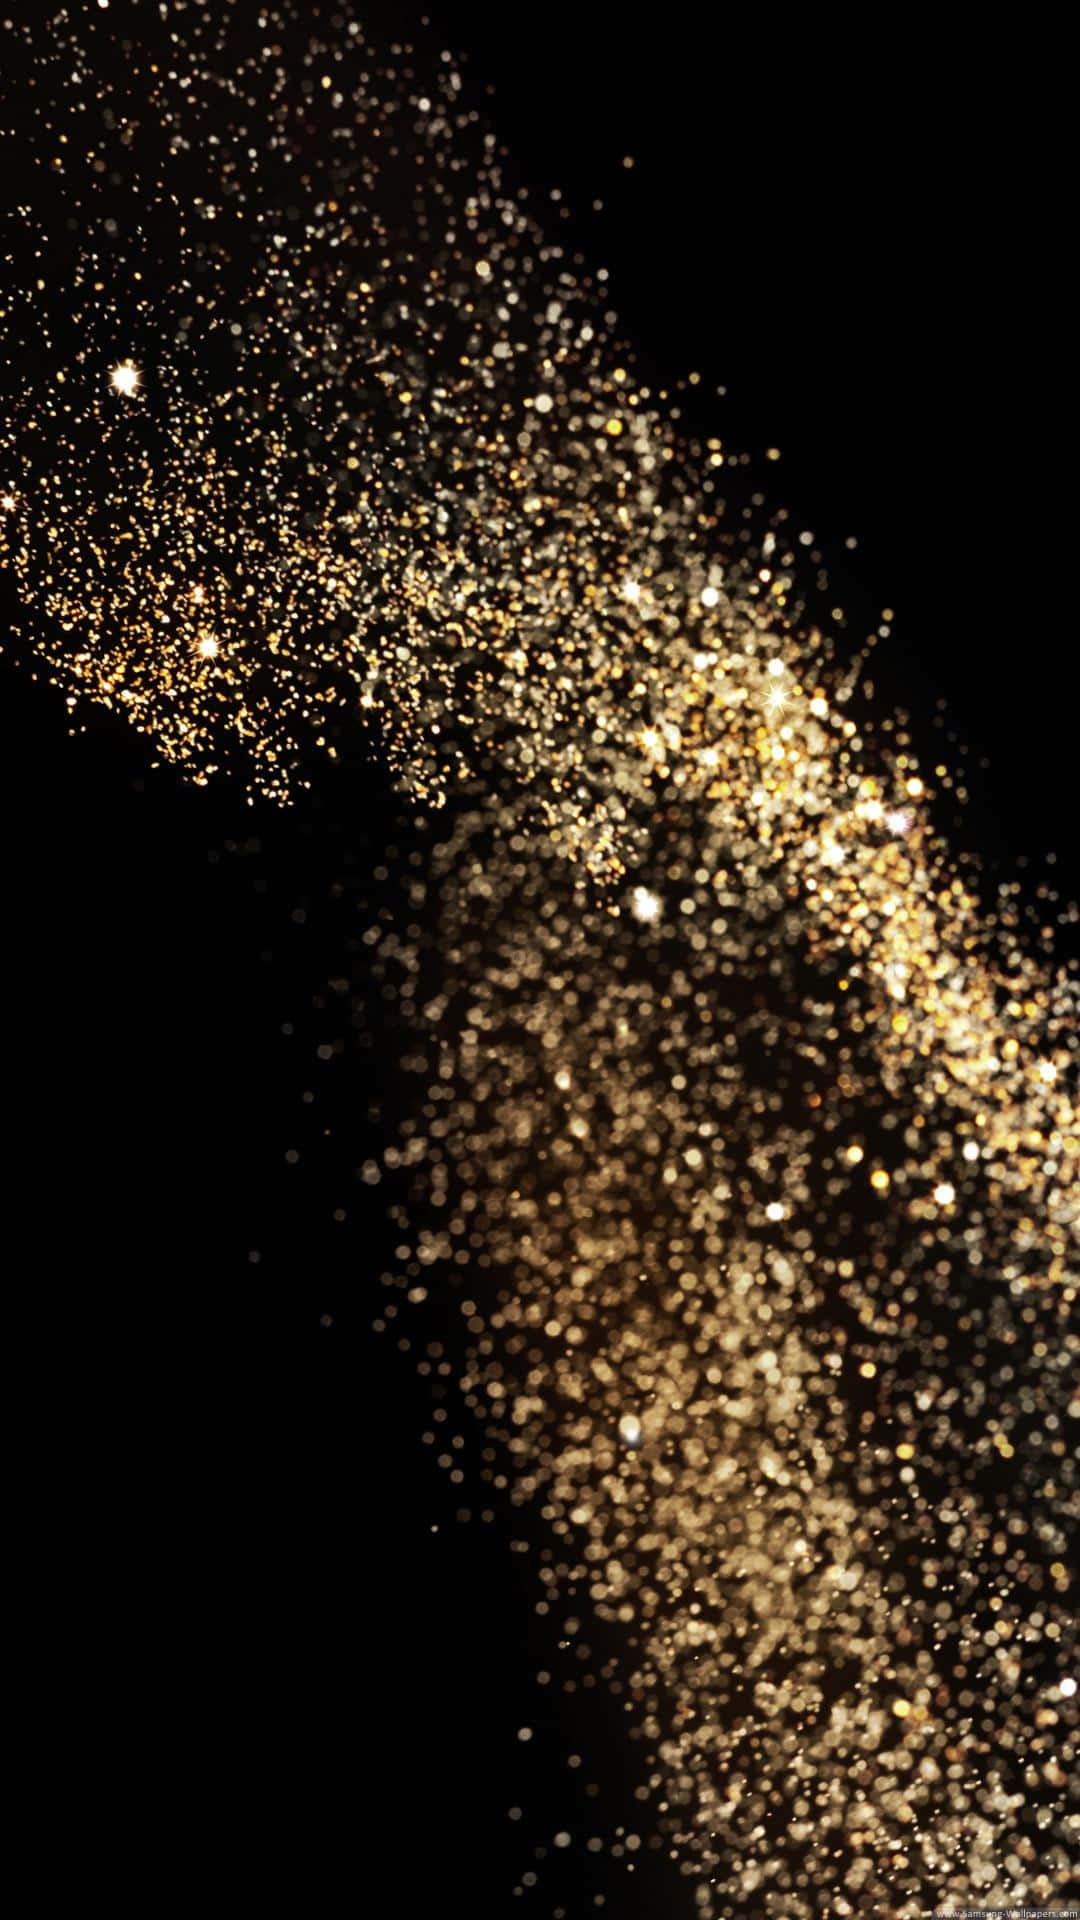 A Gold Dust Falling On A Black Background